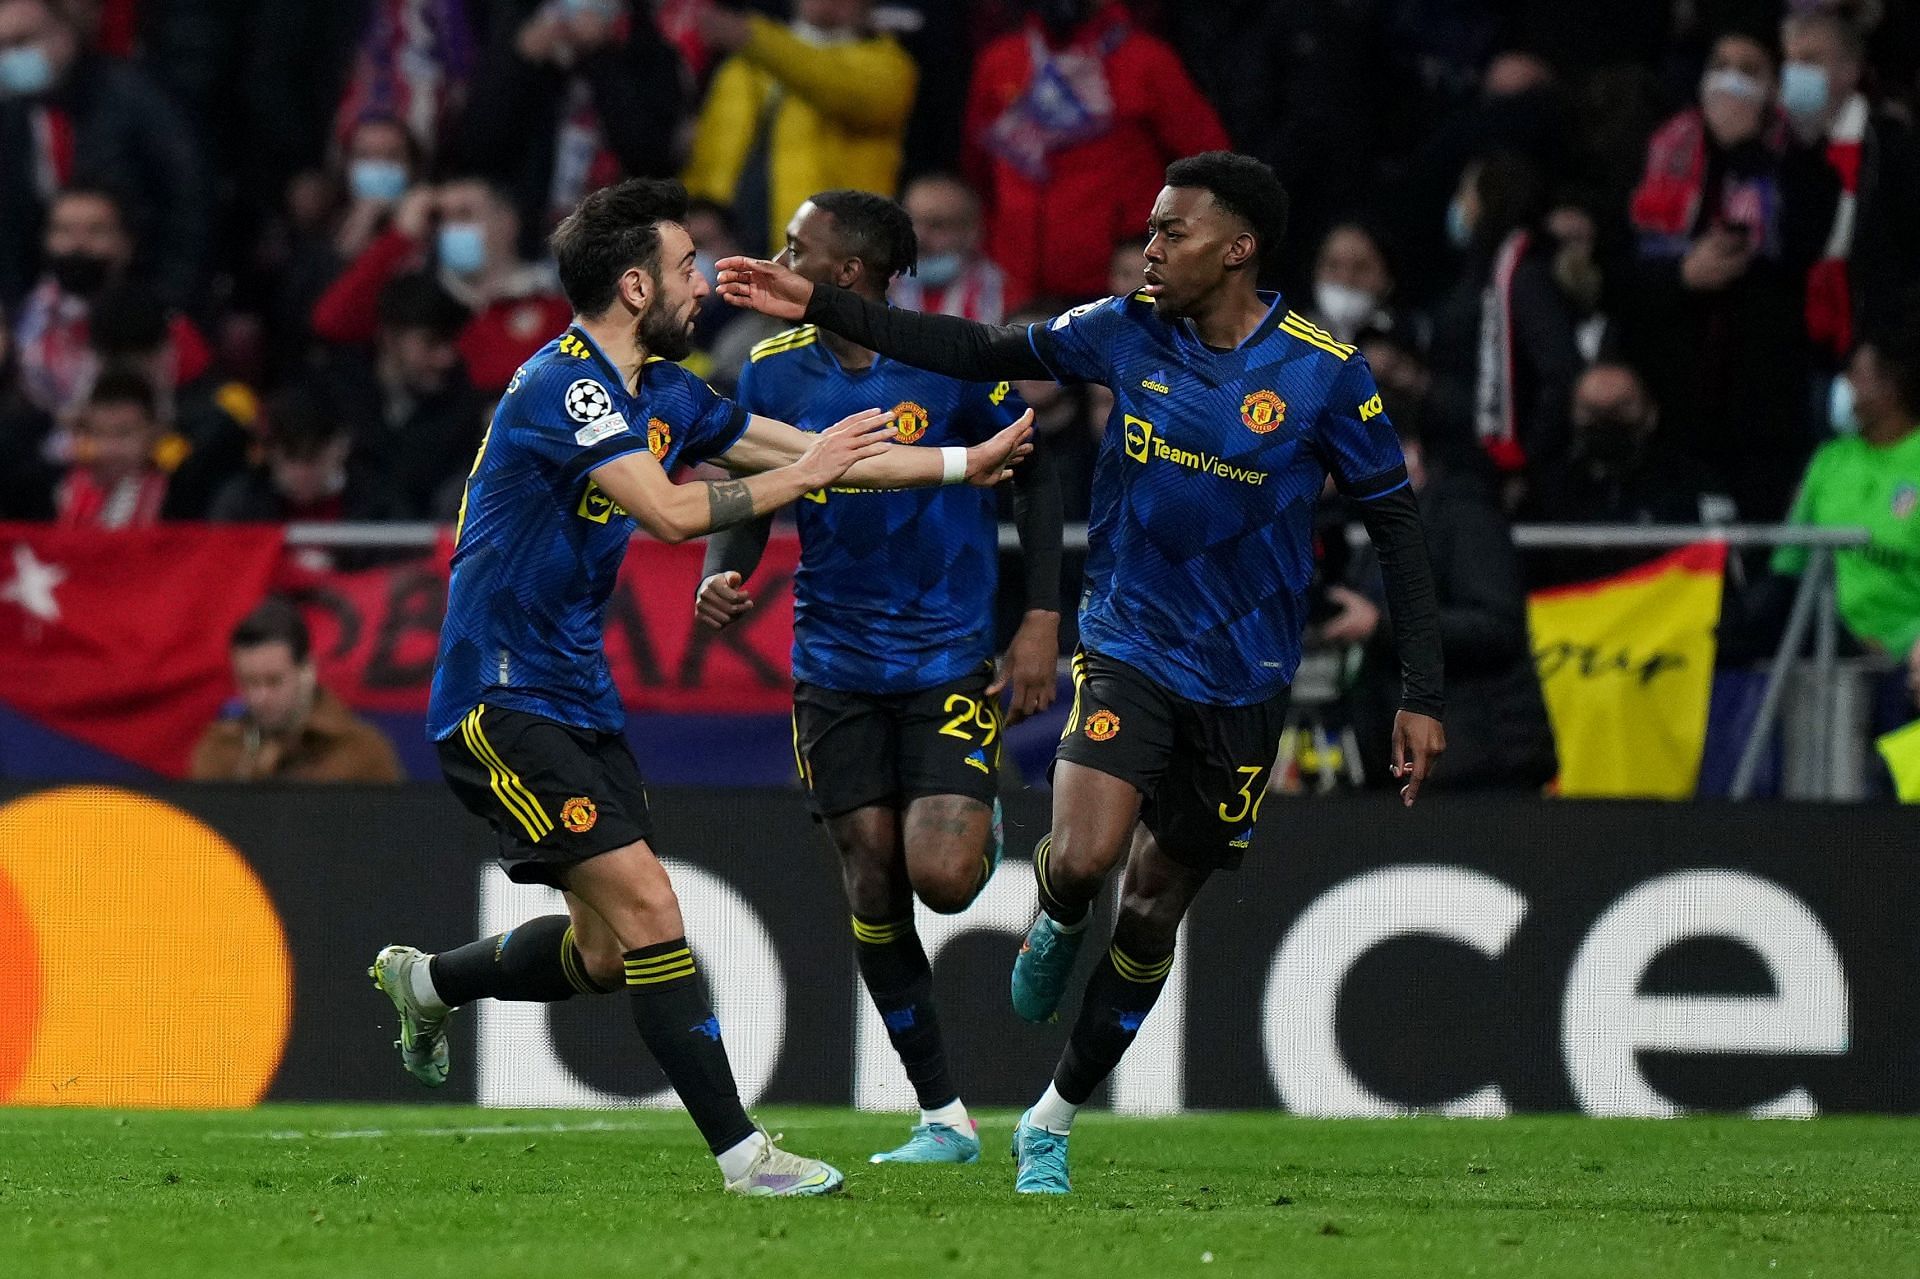 United held Atletico Madrid to a 1-1 draw in the Champions League.